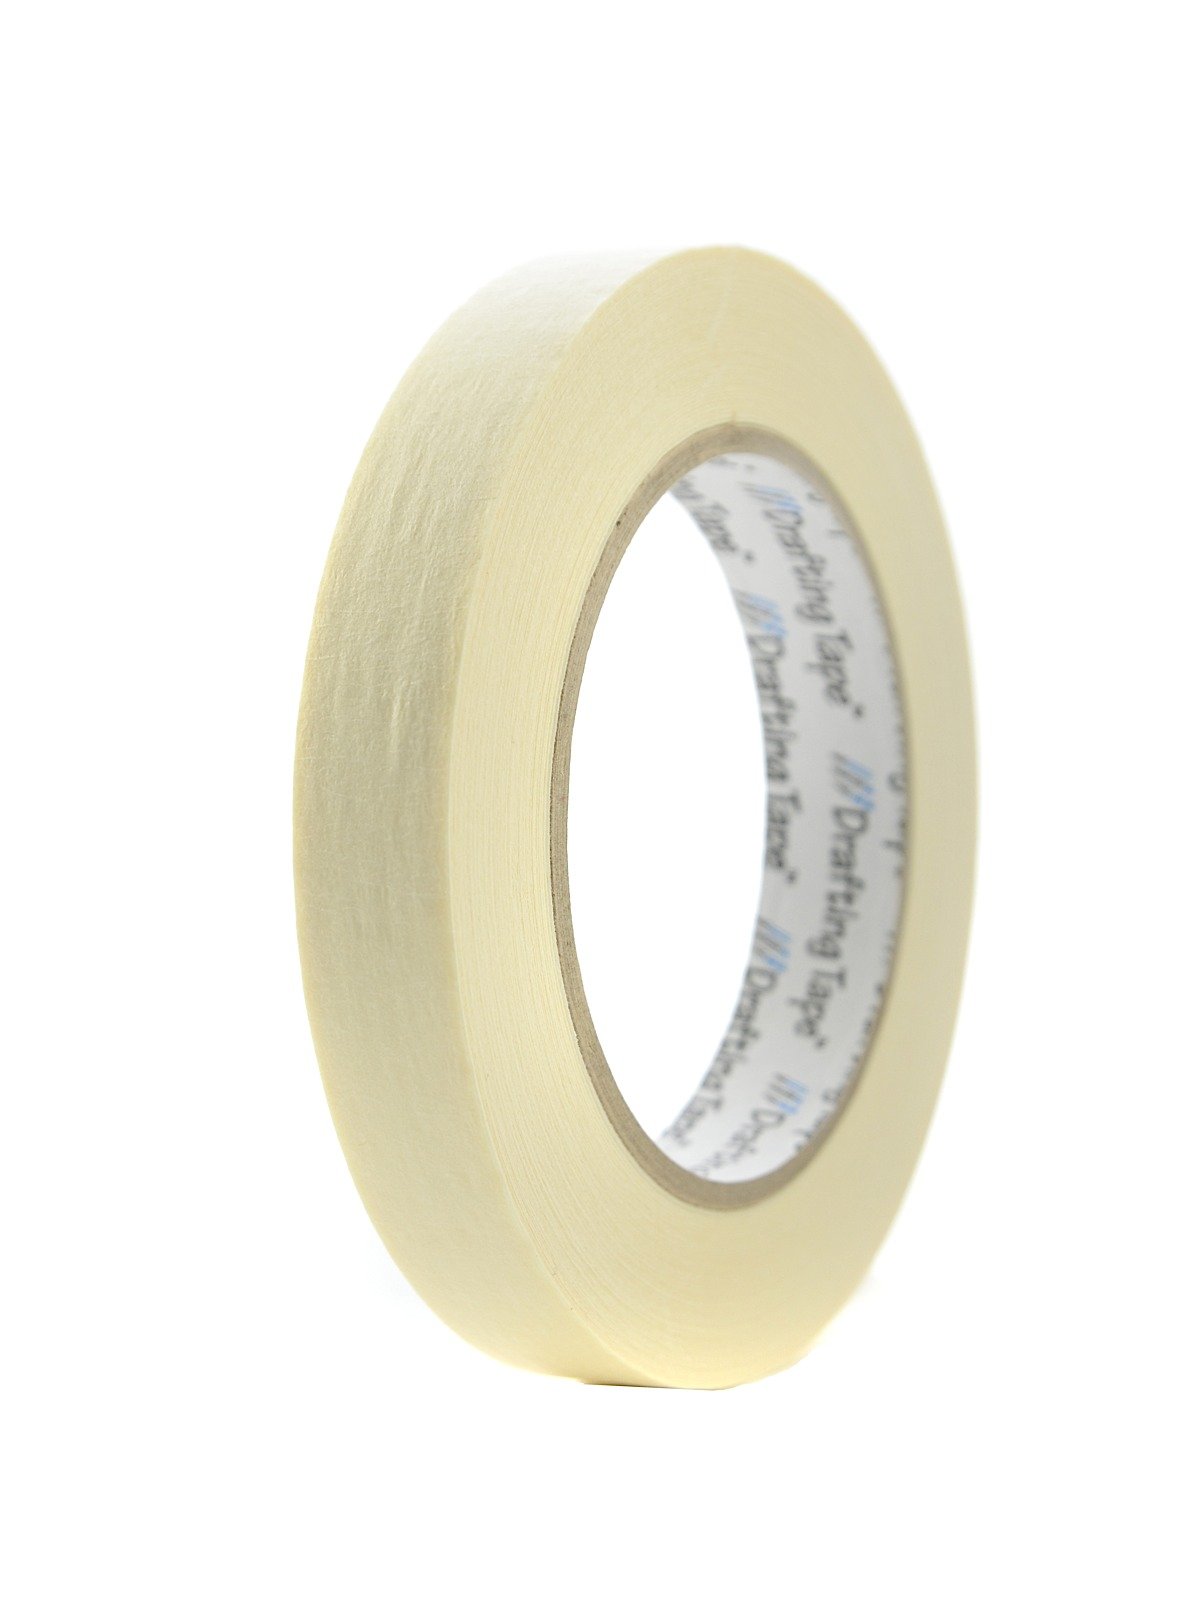 ProTapes Pro Drafting Crepe Paper Industrial Grade Masking Tape, 60 yds Length x